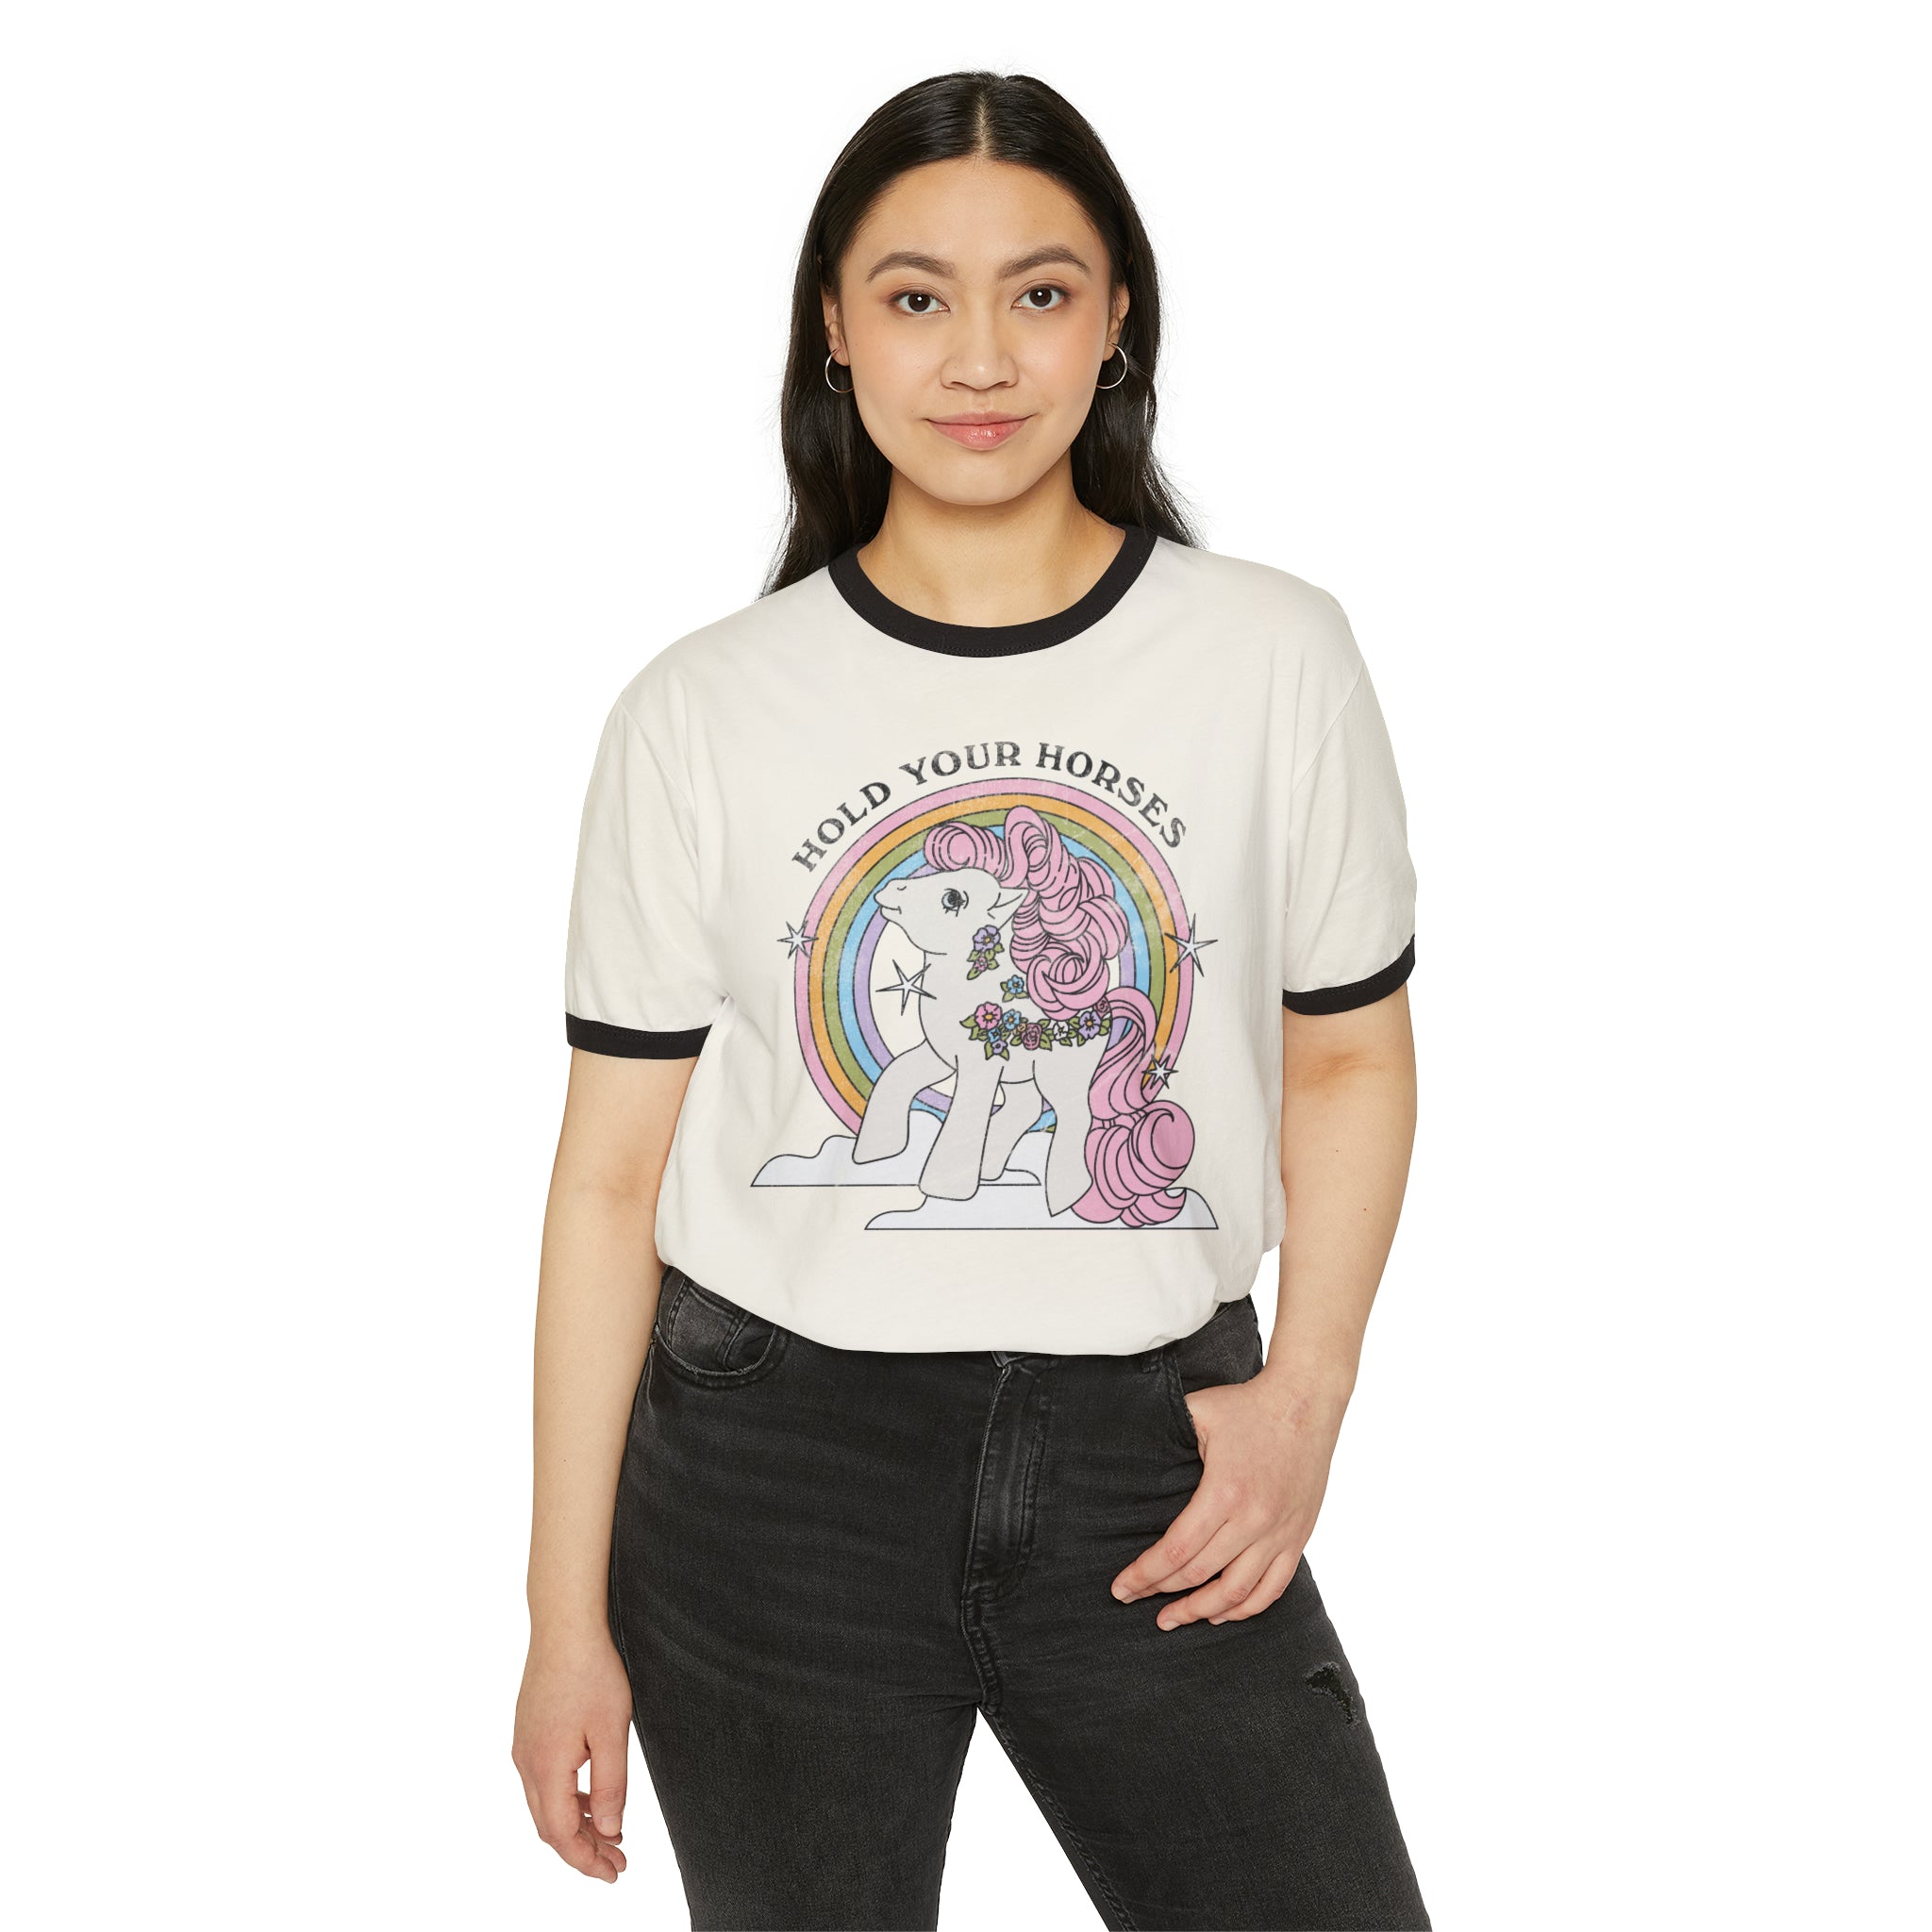 Hold Your Horses Ringer Tee